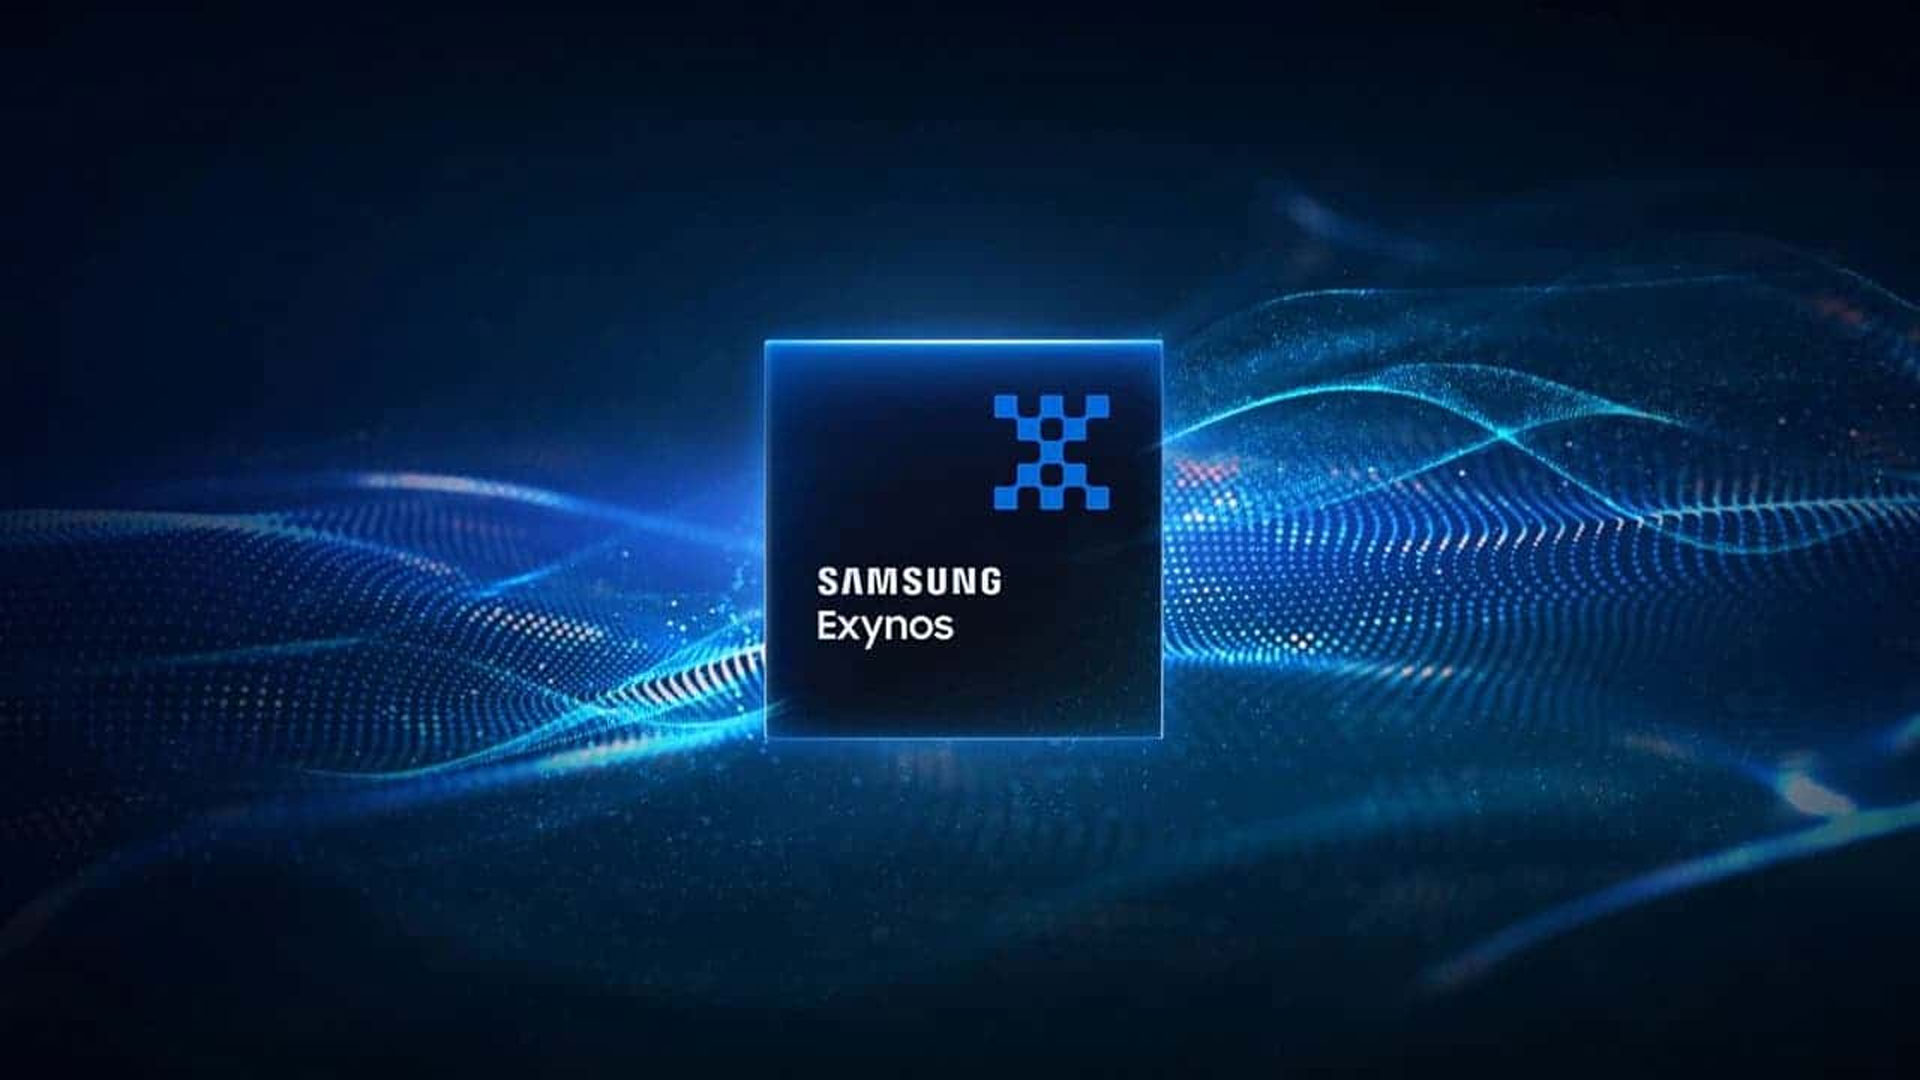  The image shows the Exynos 220 and Exynos 2400 chips which improves power efficiency.